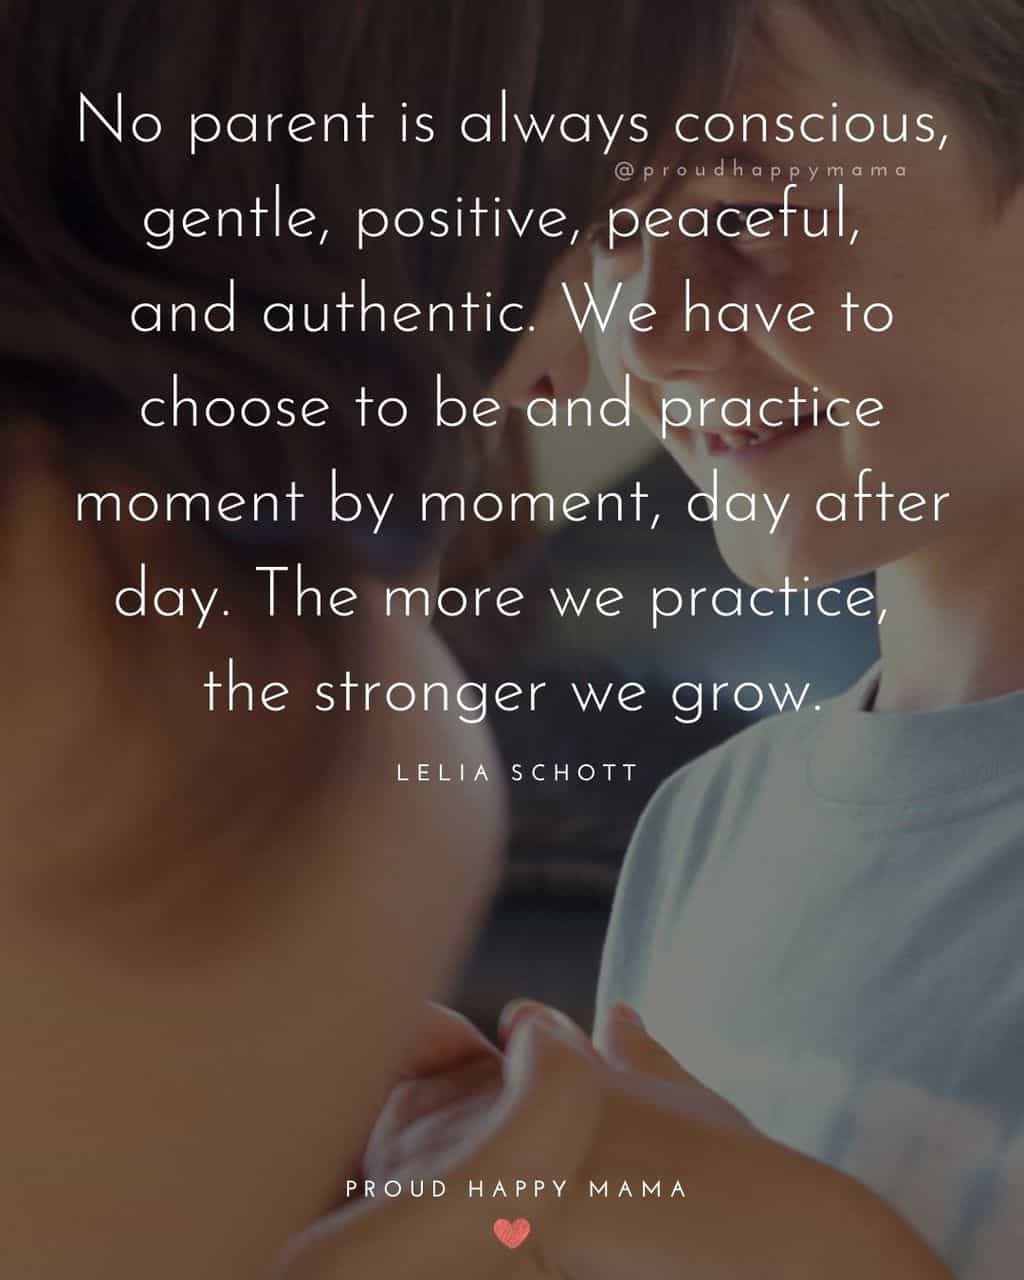 Parenting Quotes - No parent is always conscious, gentle, positive, peaceful, and authentic. We have to choose to be and practice